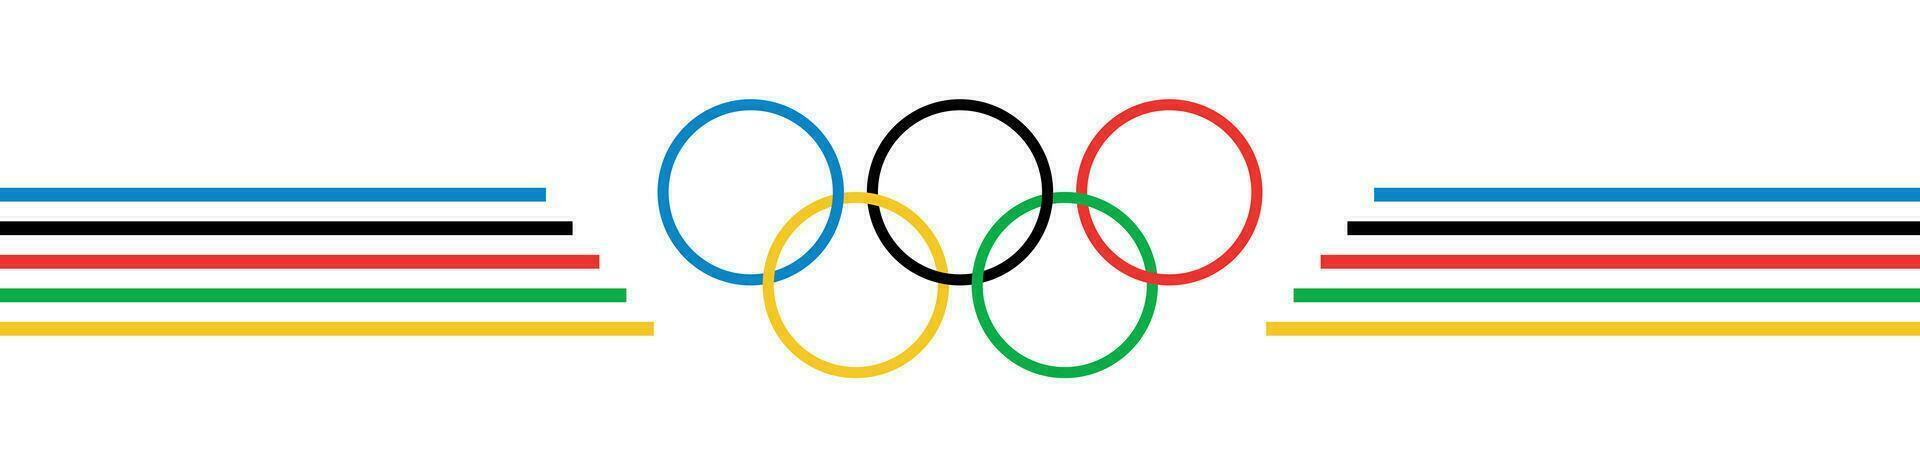 Olympics ring logo isolated on white background. Summer olympic games. Paris 2024. Header for letters, websites, mailing lists. Olympic games banner vector